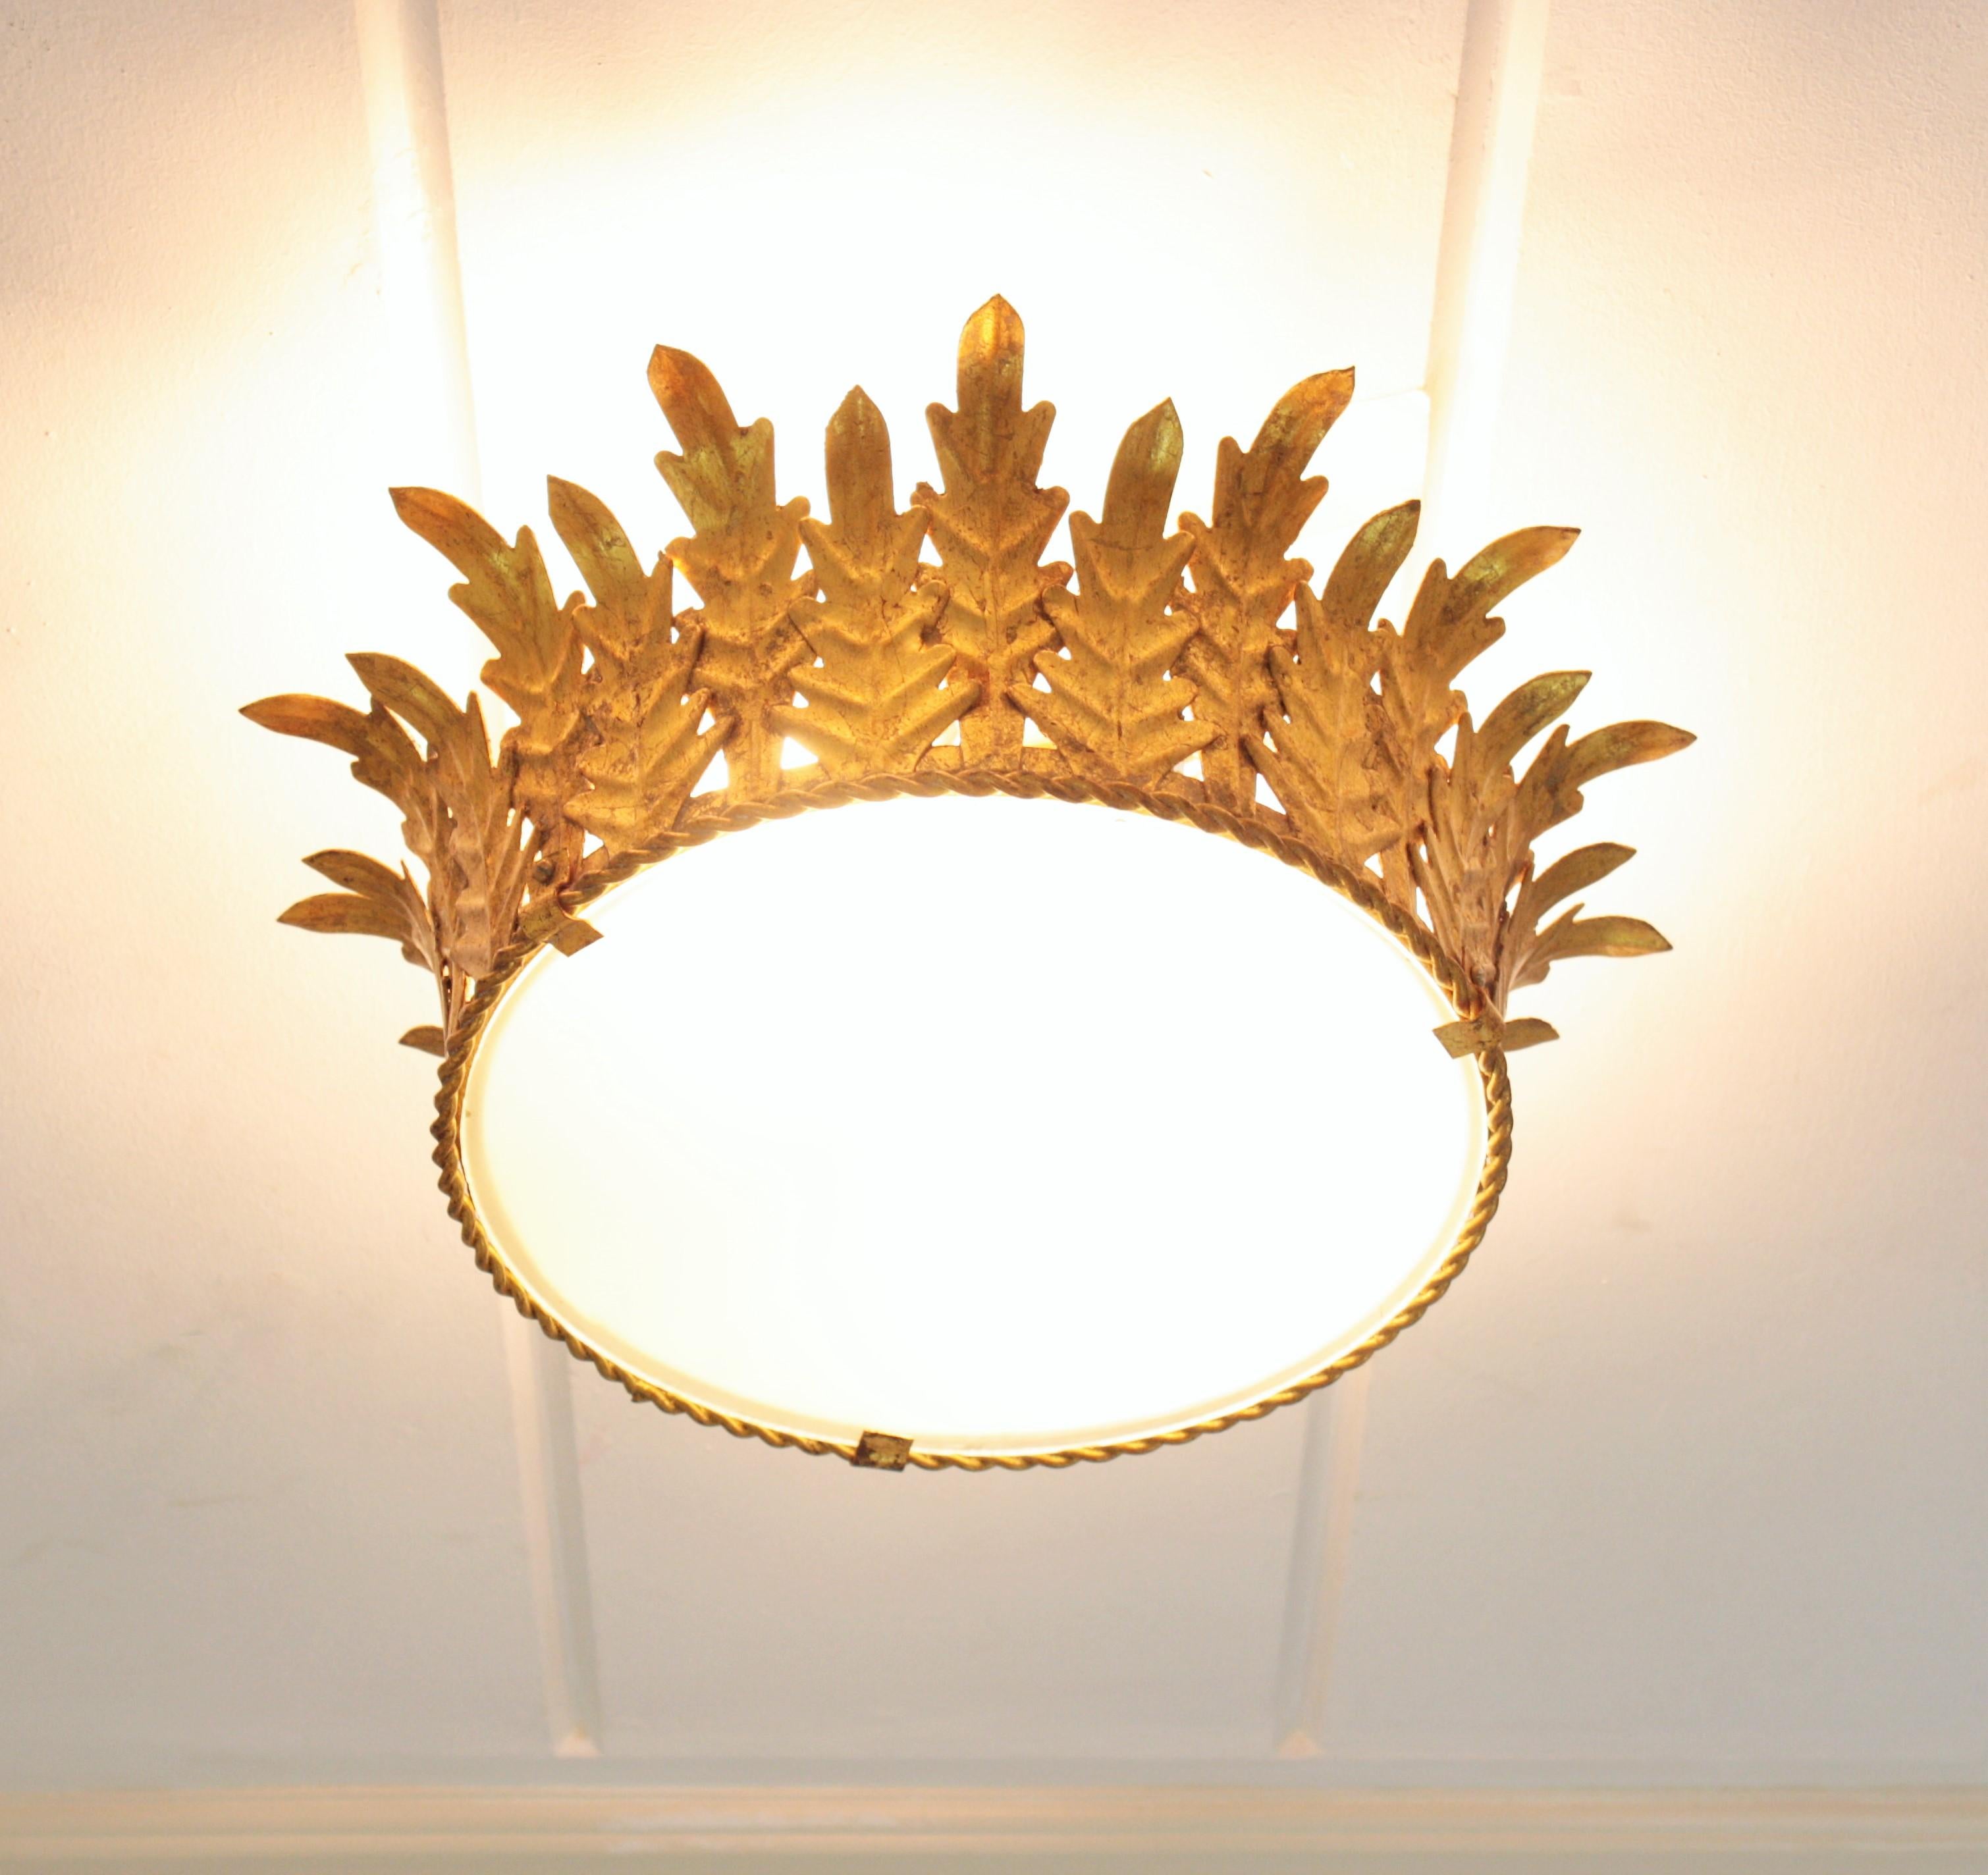 20th Century Large Crown Shaped Ceiling Light Fixture or Pendant in Gilt Metal